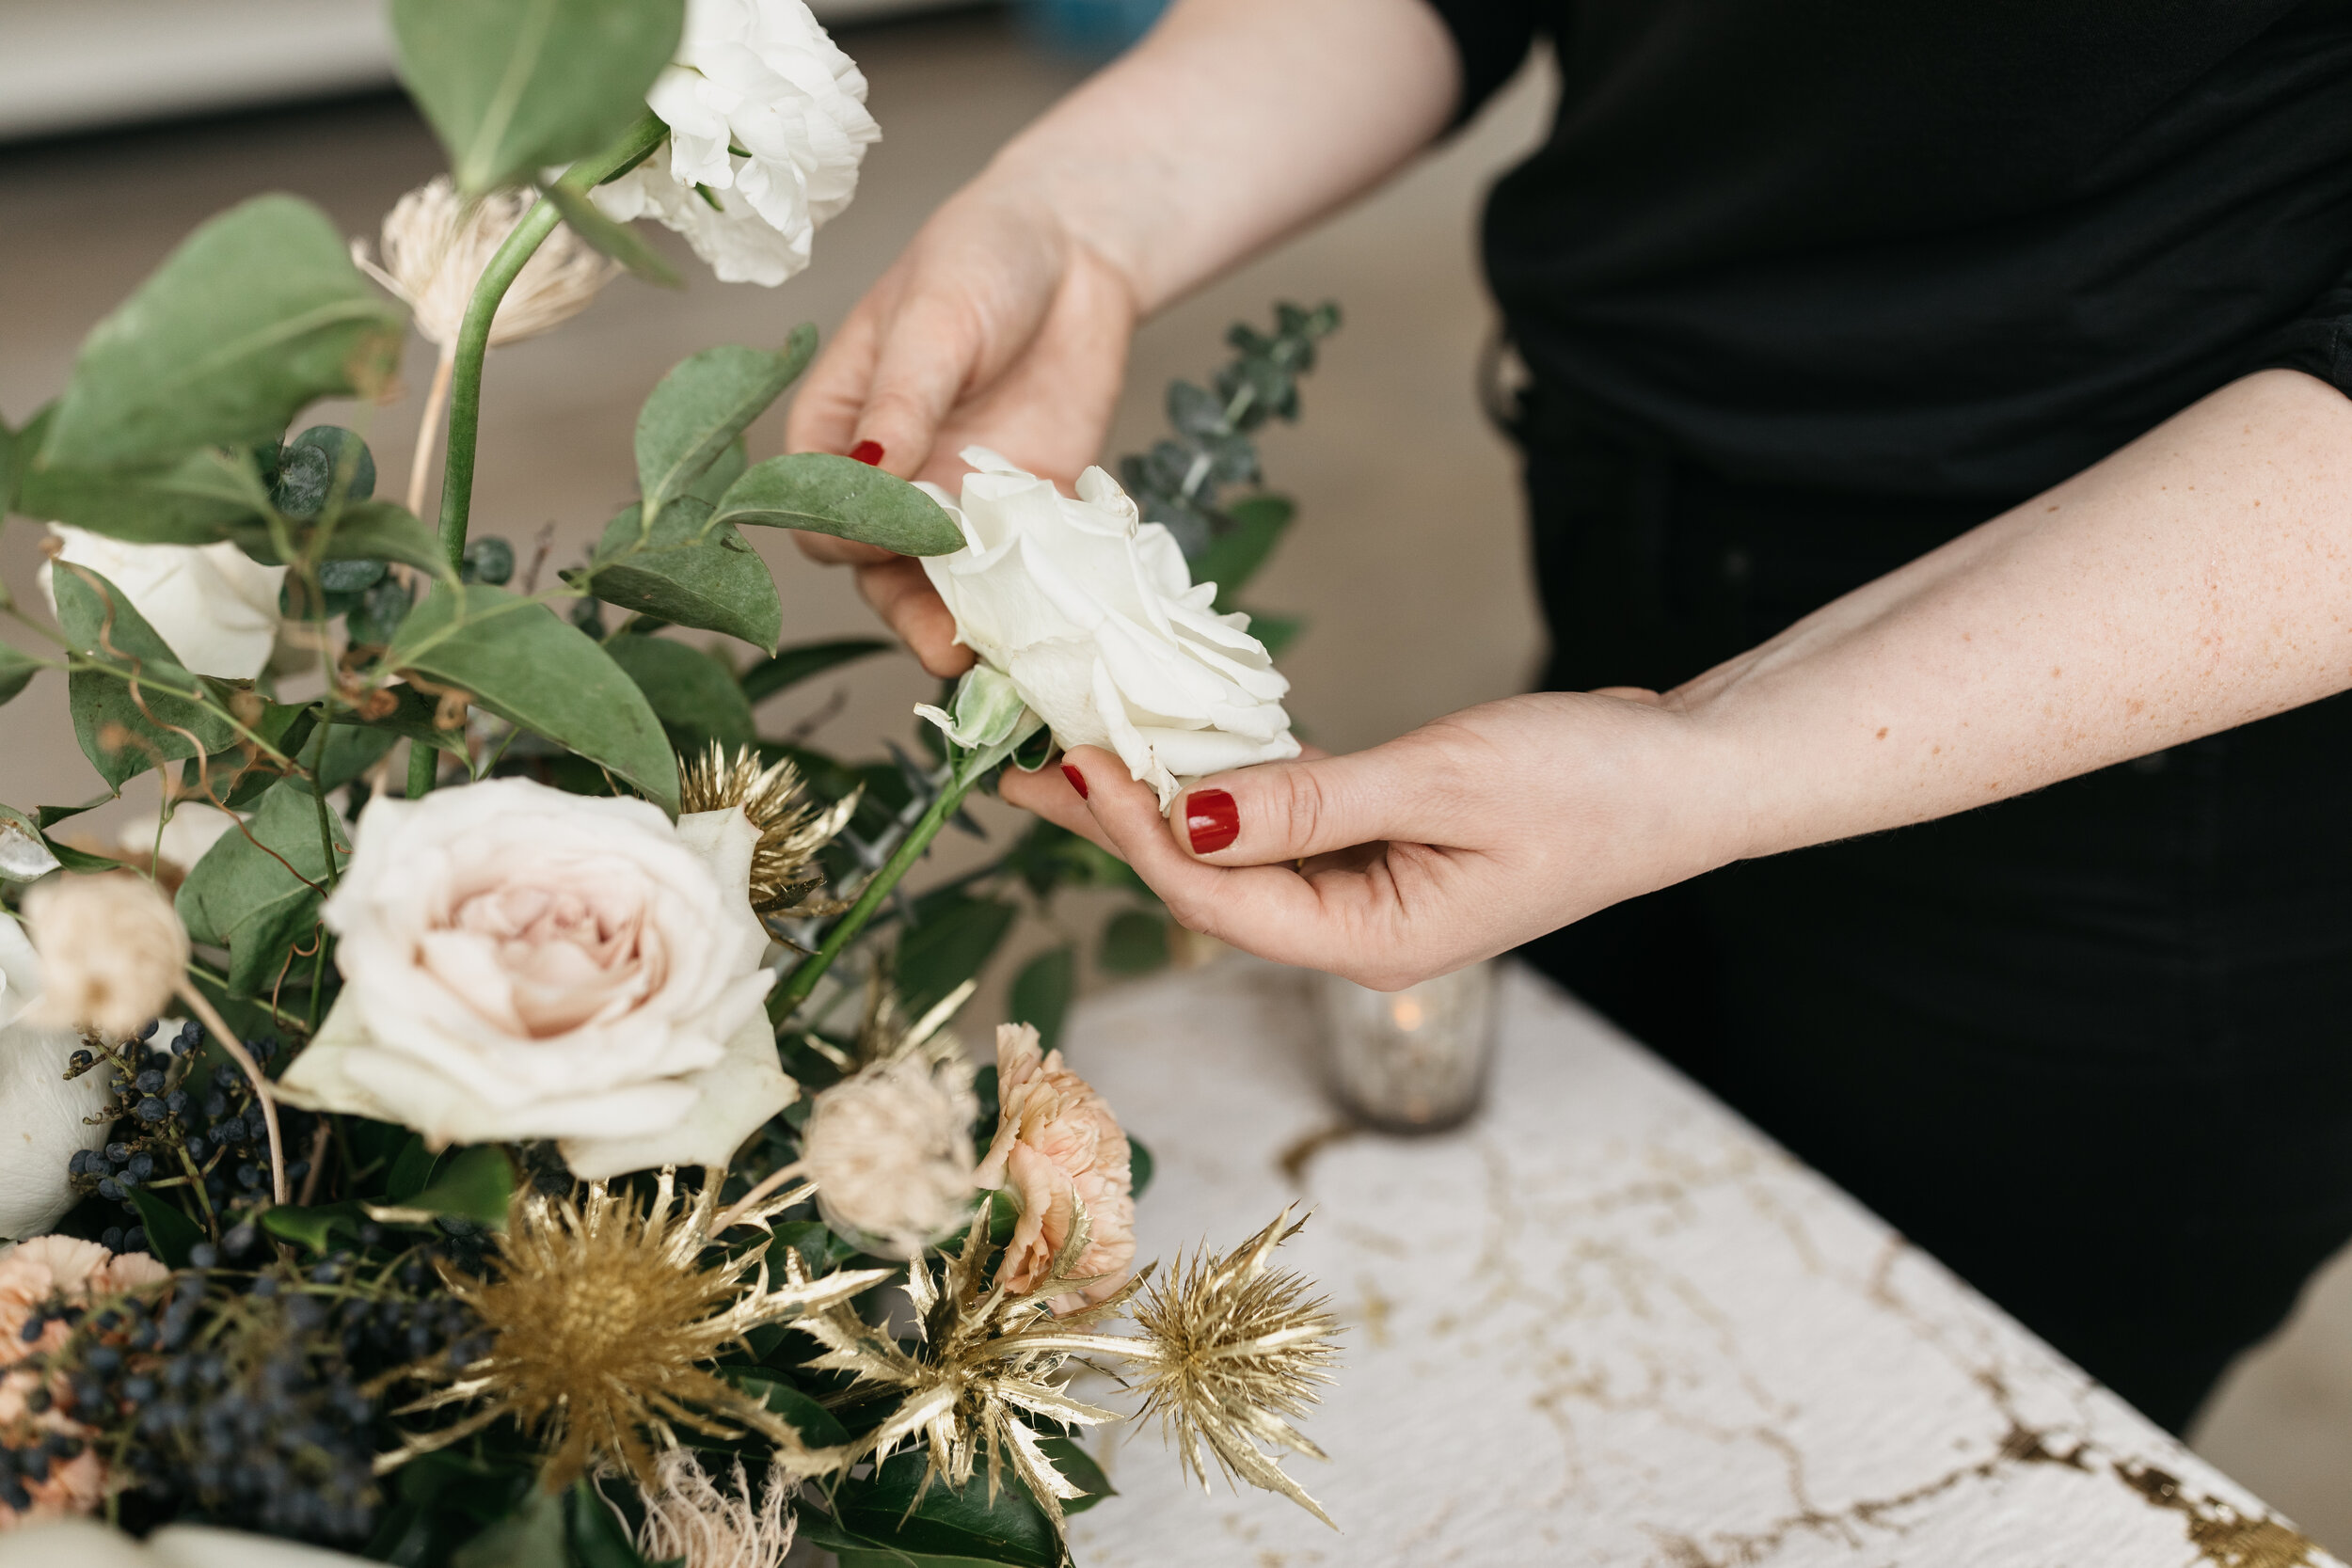 Winter inspiration centerpiece featuring white roses, berries, touches of gold, baby eucalyptus, and lush greenery. Nashville wedding florist Rosemary & Finch at OZARI.